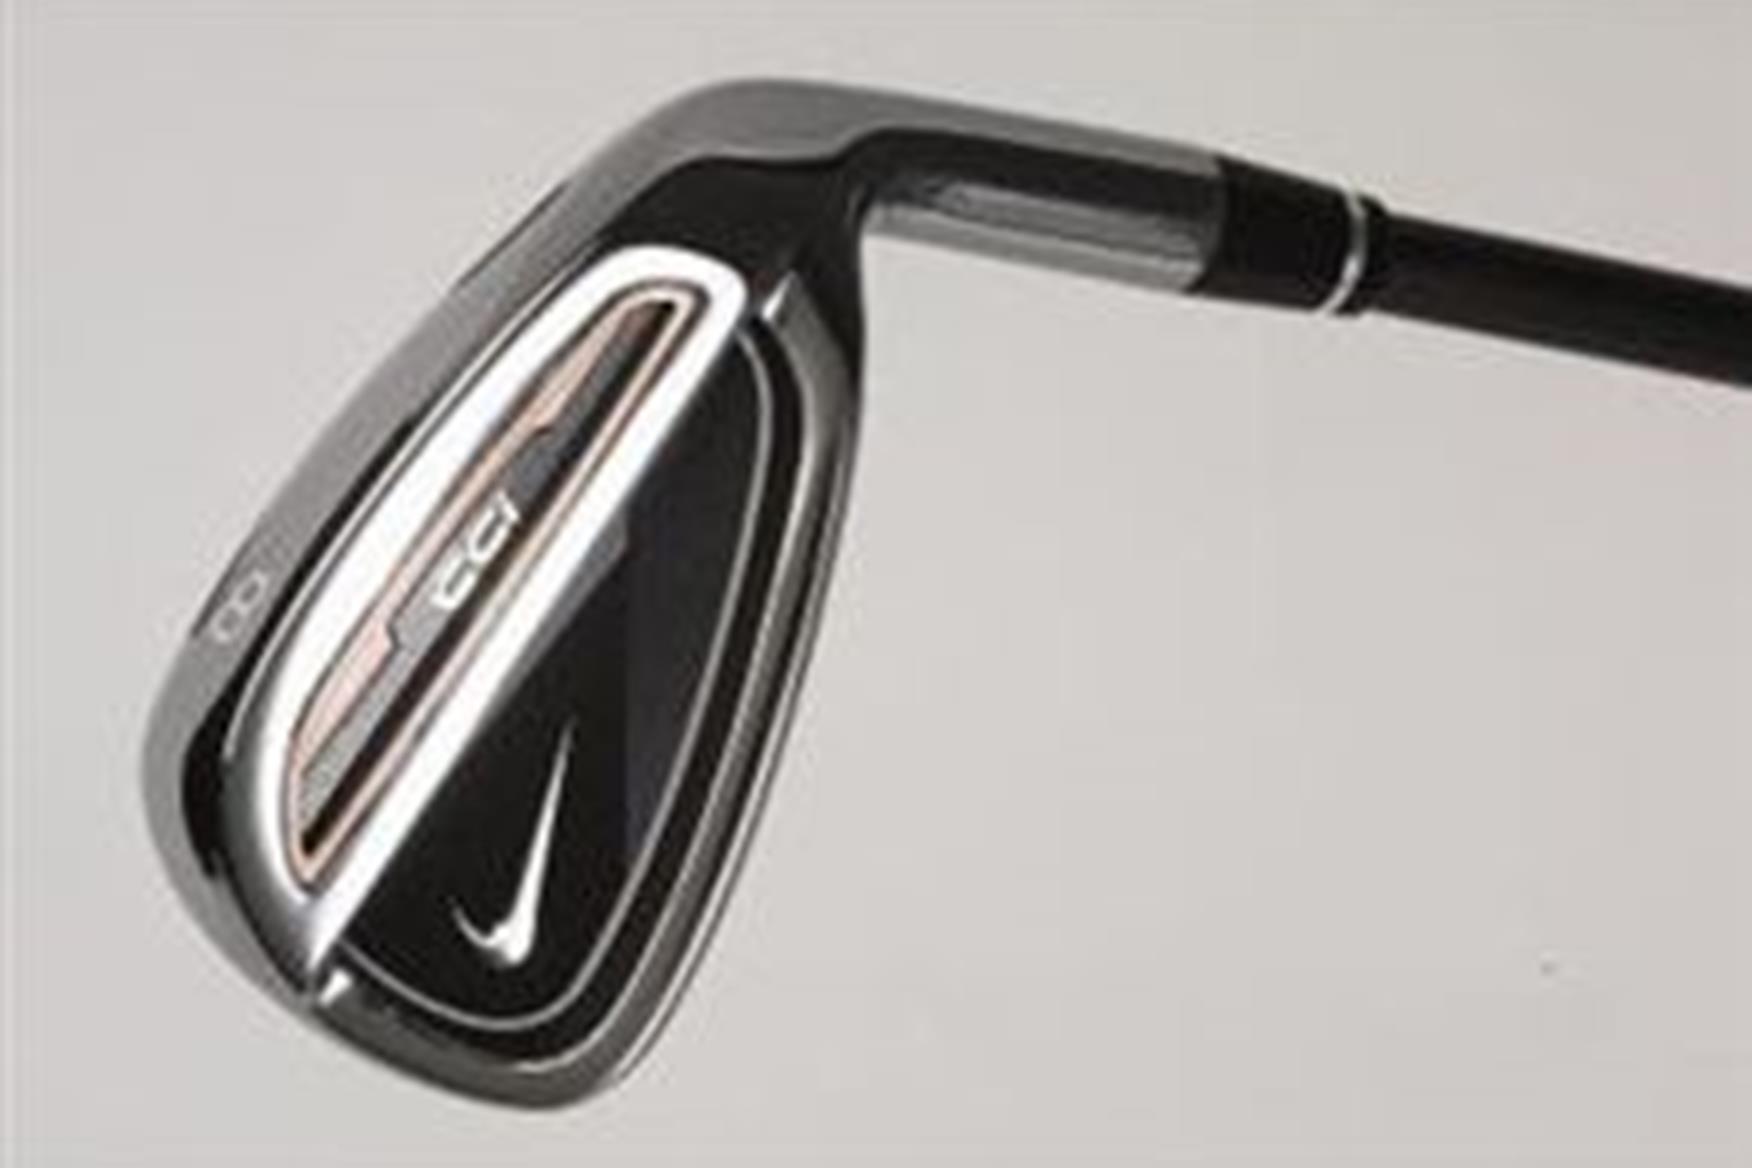 nike irons by year